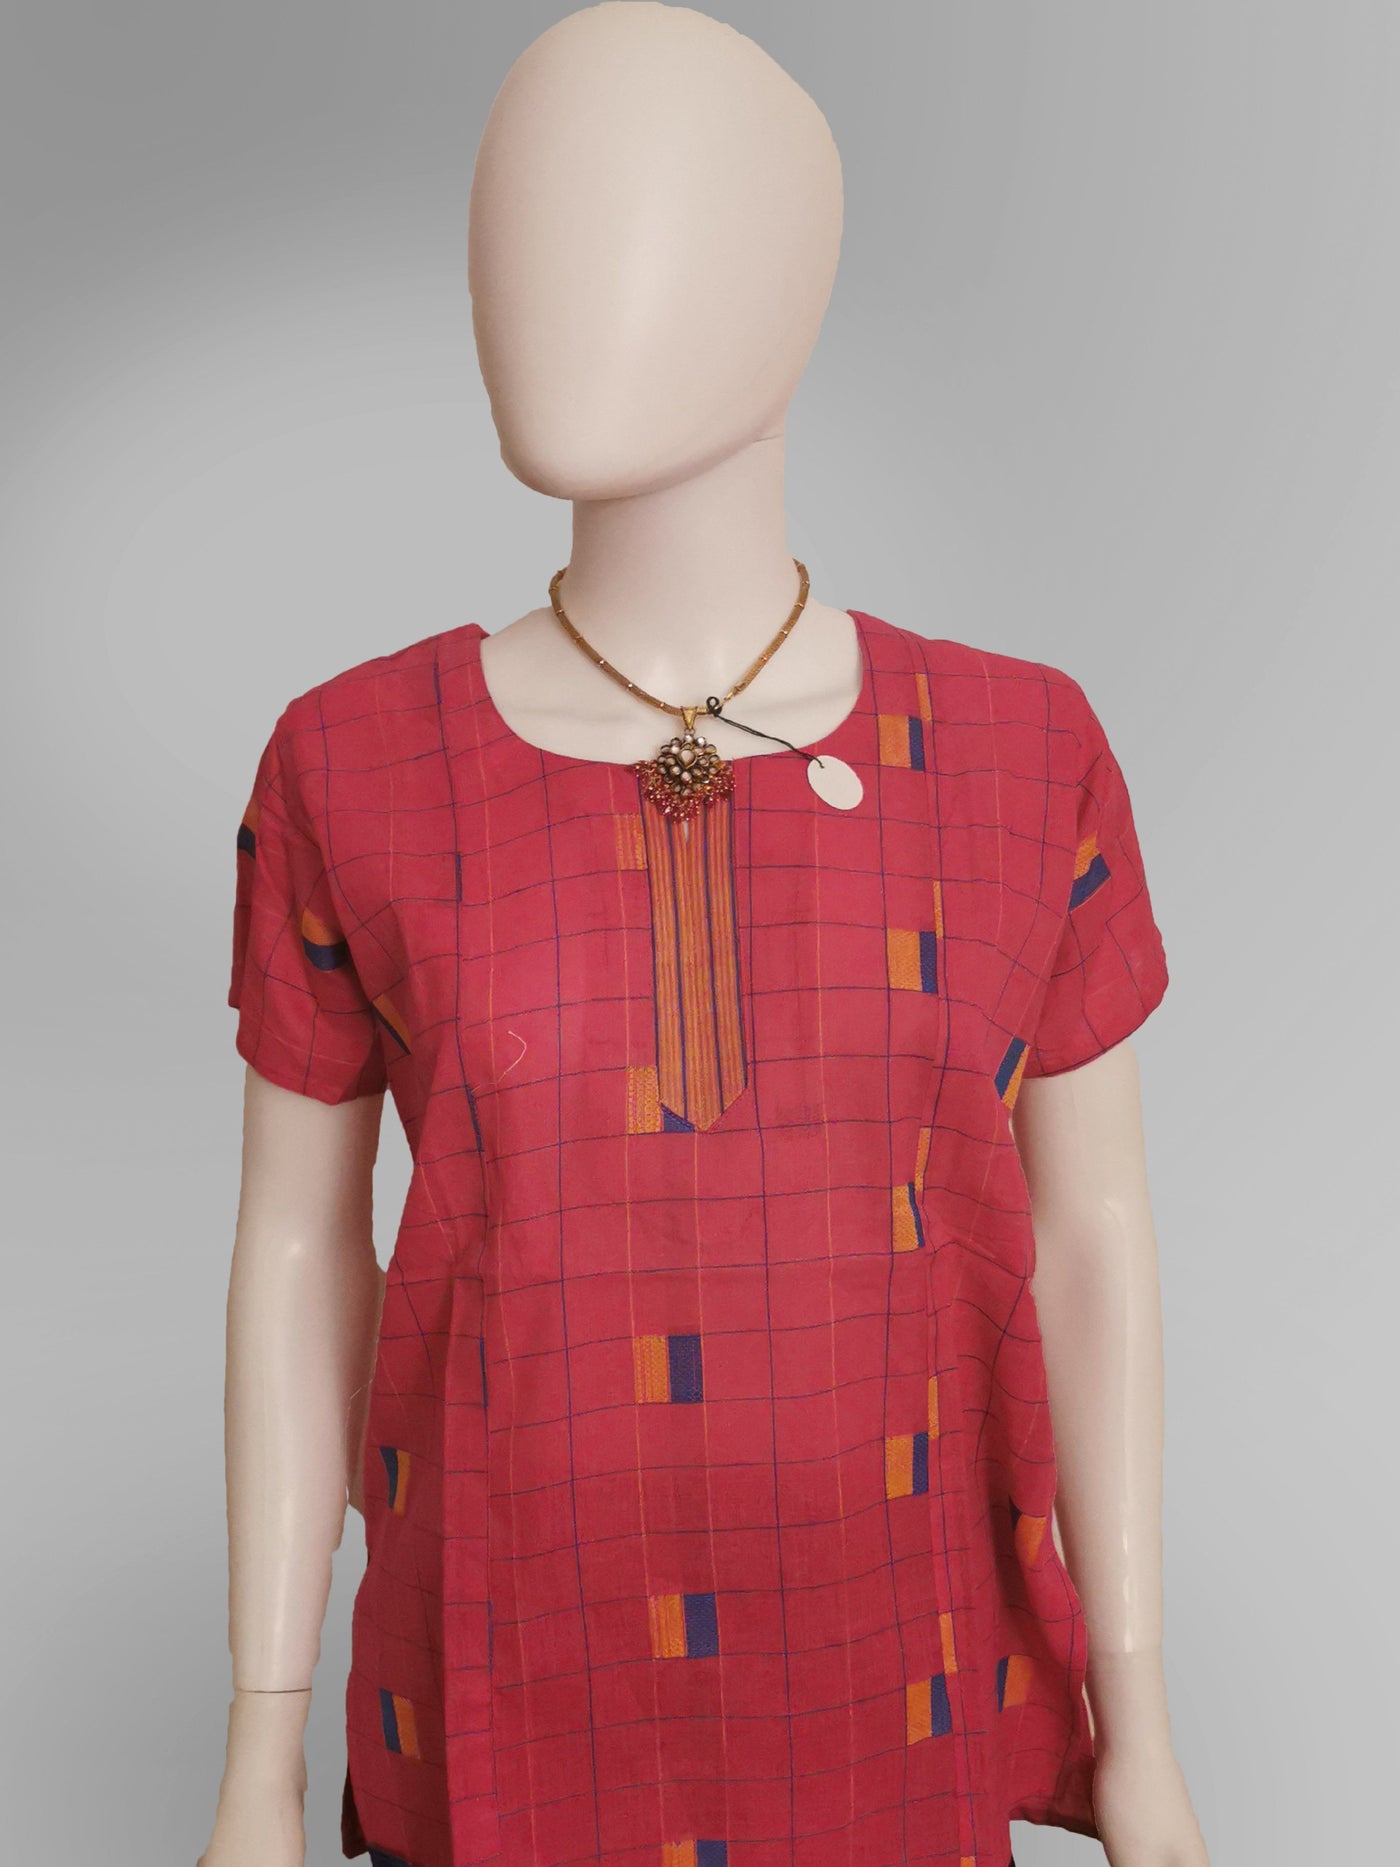 Kurti Top in Print Design - Indian Clothing in Denver, CO, Aurora, CO, Boulder, CO, Fort Collins, CO, Colorado Springs, CO, Parker, CO, Highlands Ranch, CO, Cherry Creek, CO, Centennial, CO, and Longmont, CO. Nationwide shipping USA - India Fashion X